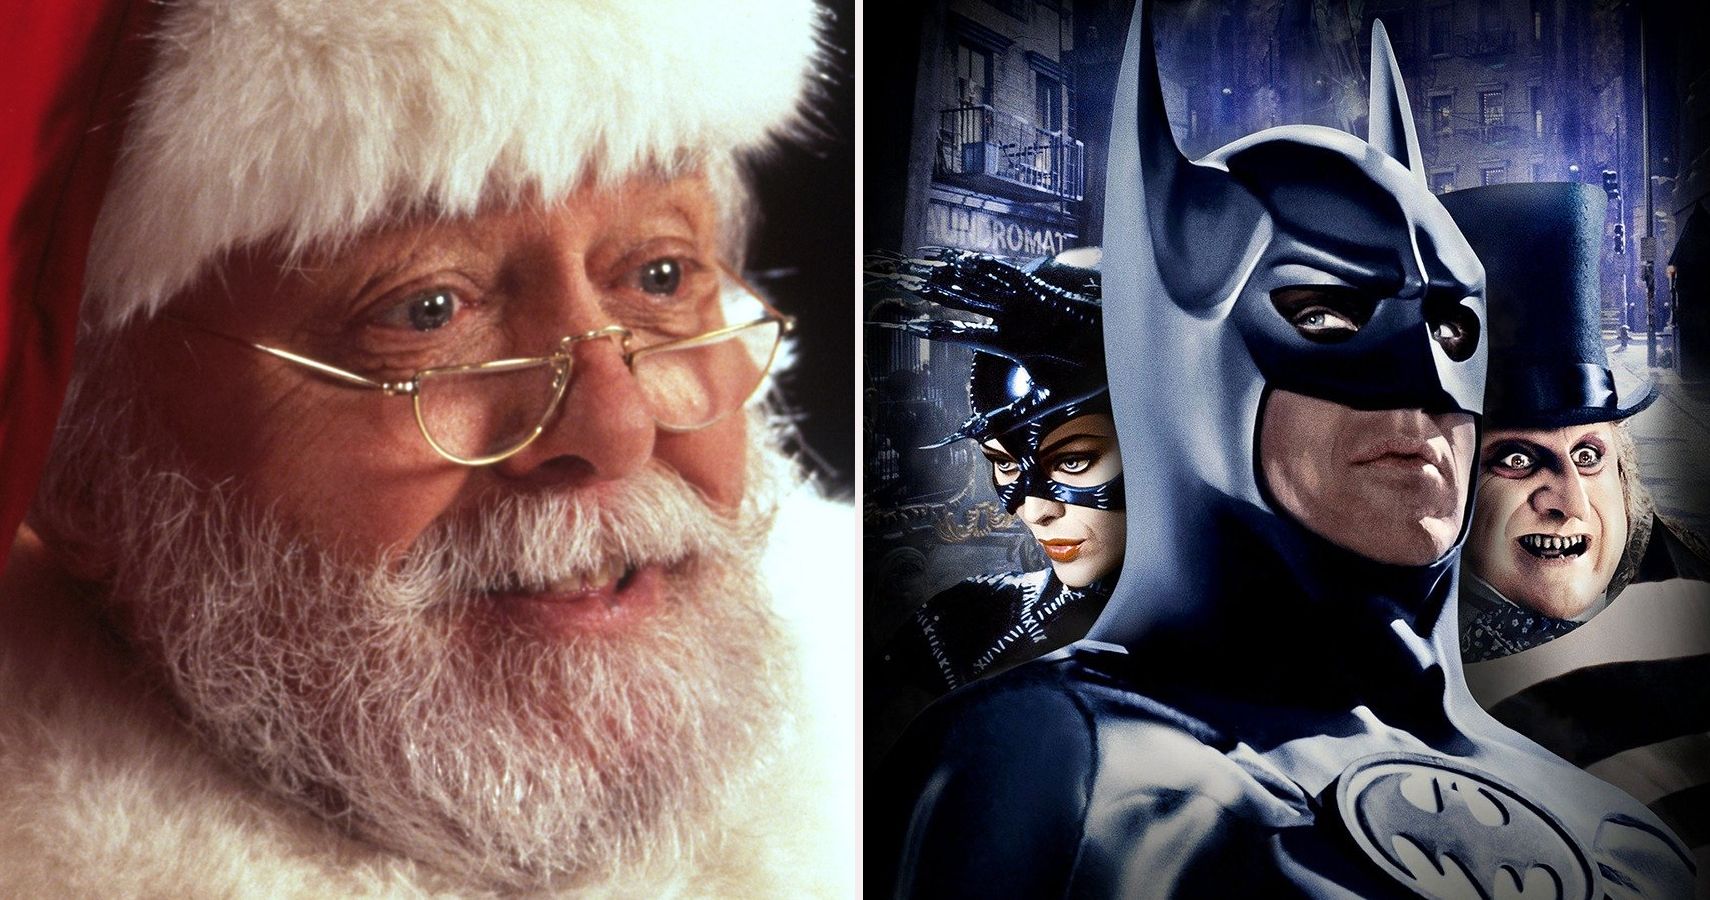 10 Seriously Underrated Christmas And Holiday Movies (According to IMDb)